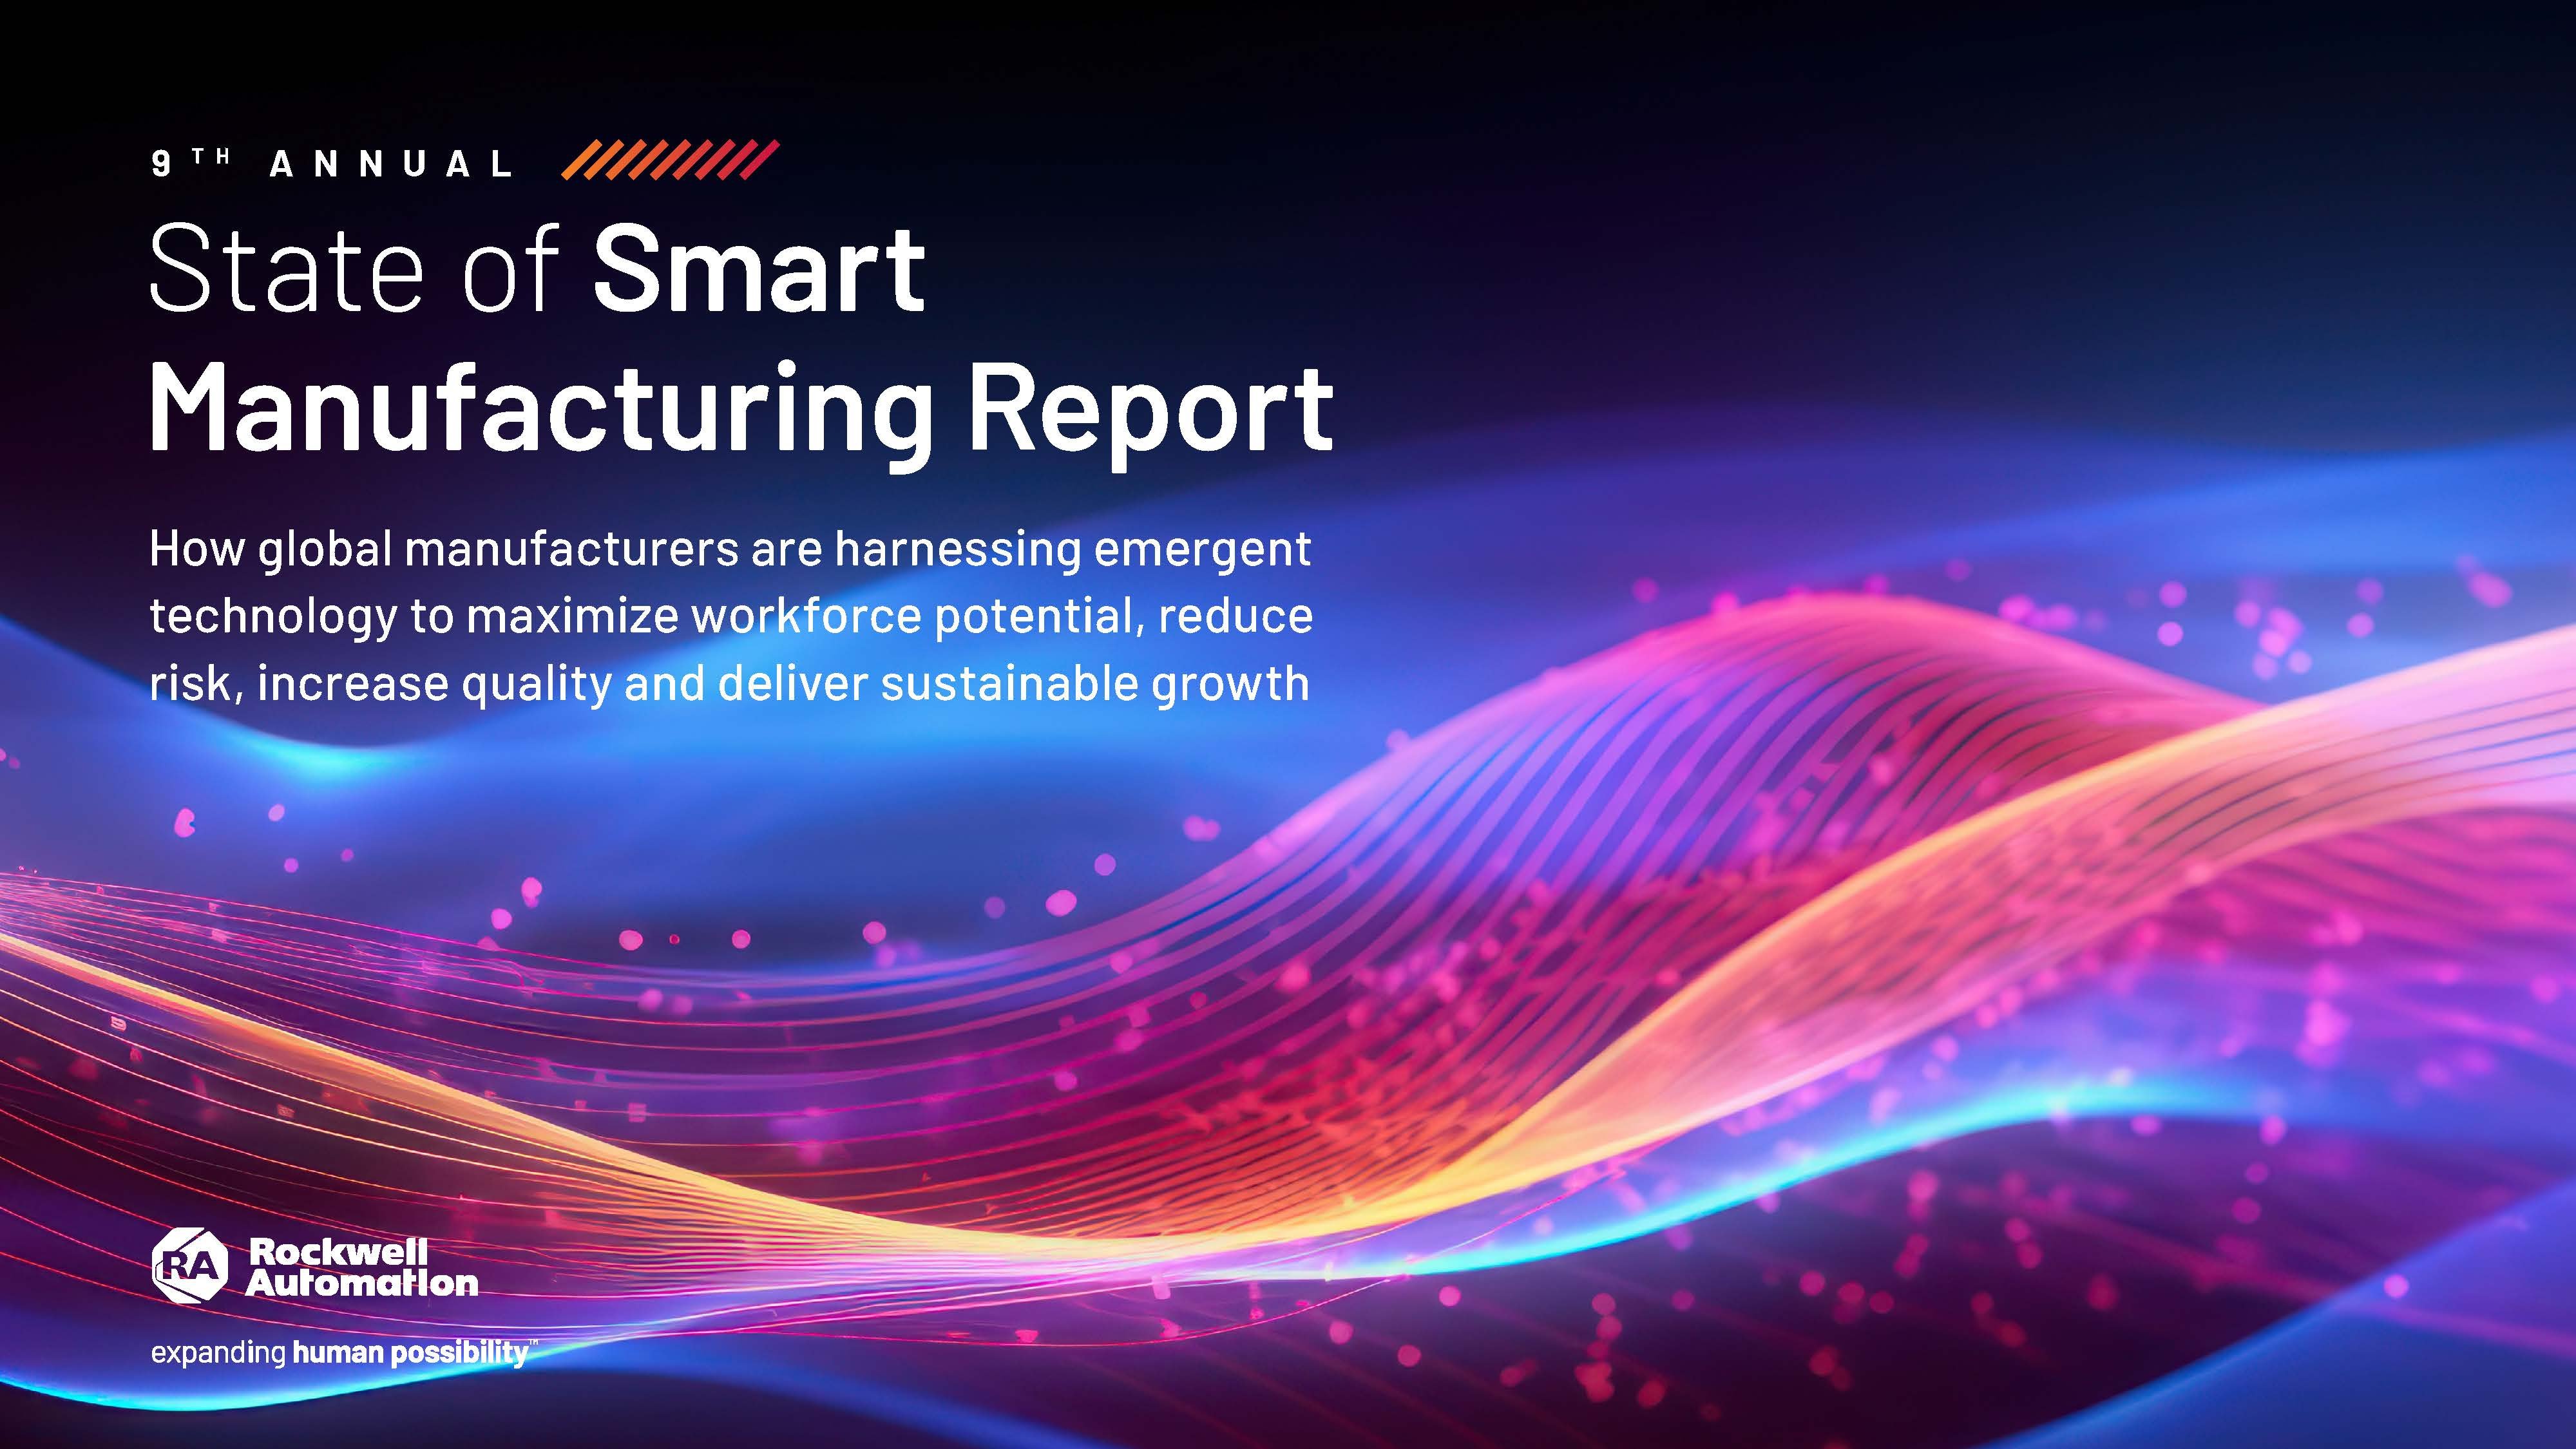 State of Smart Manufacturing 9th Annual Report